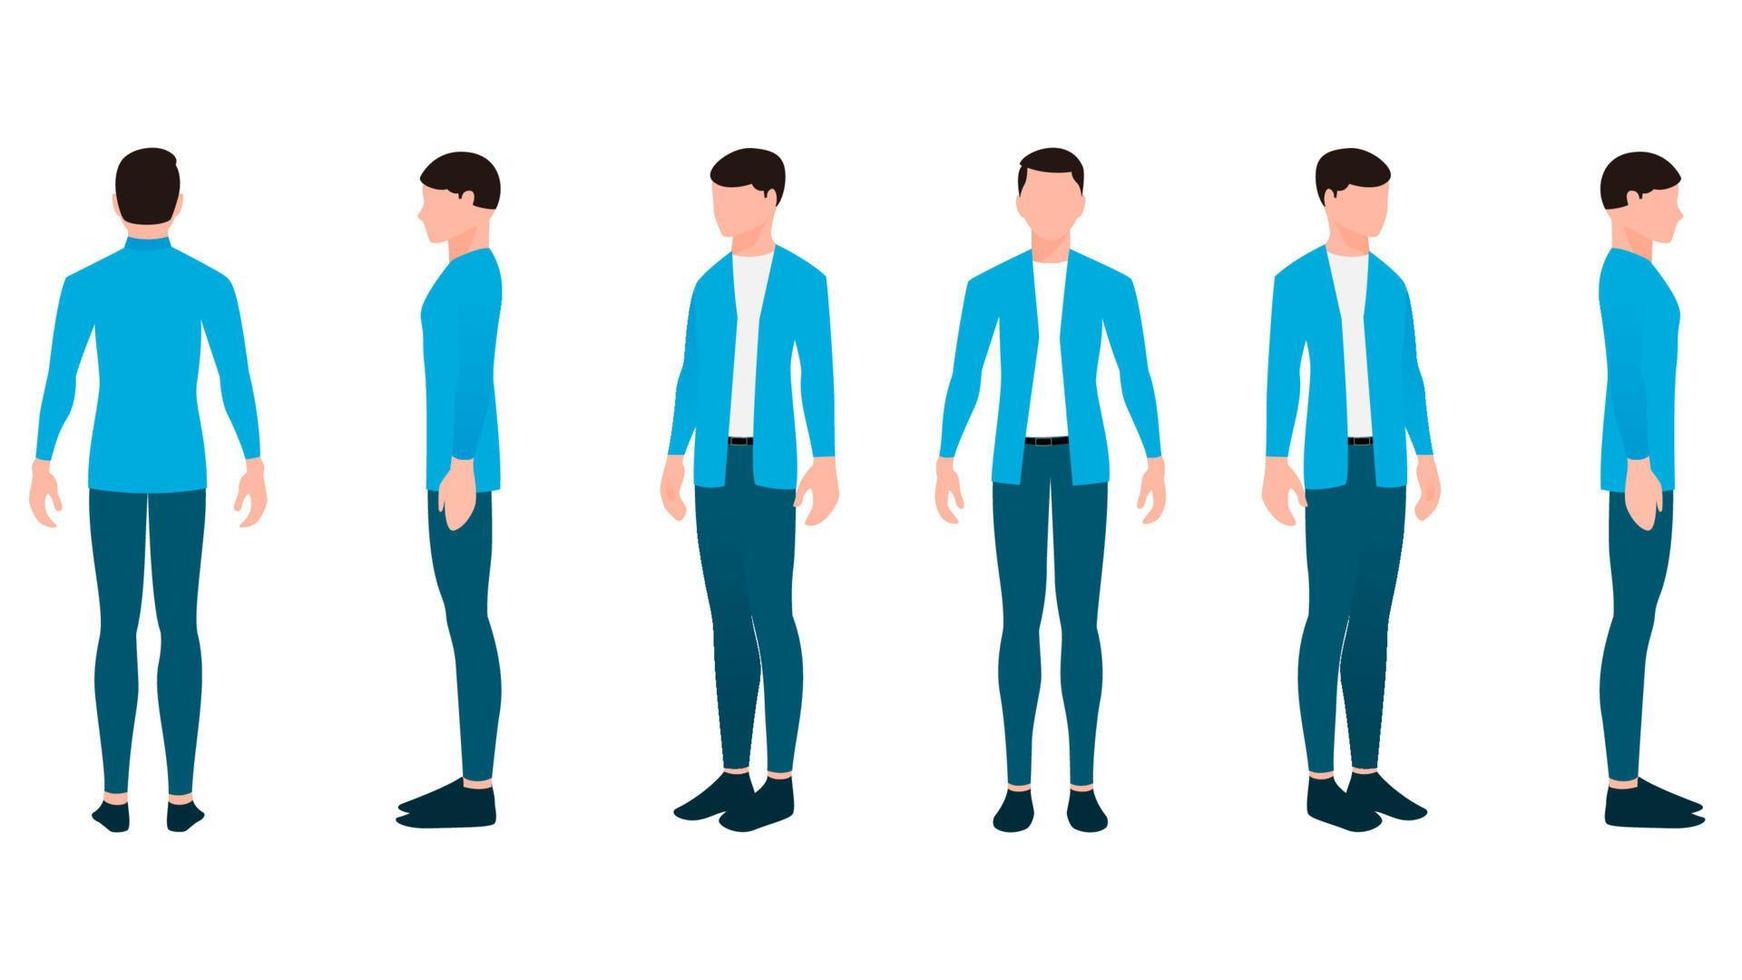 businessman cartoon character illustration, vector illustration of male character in formal clothes from different angles.